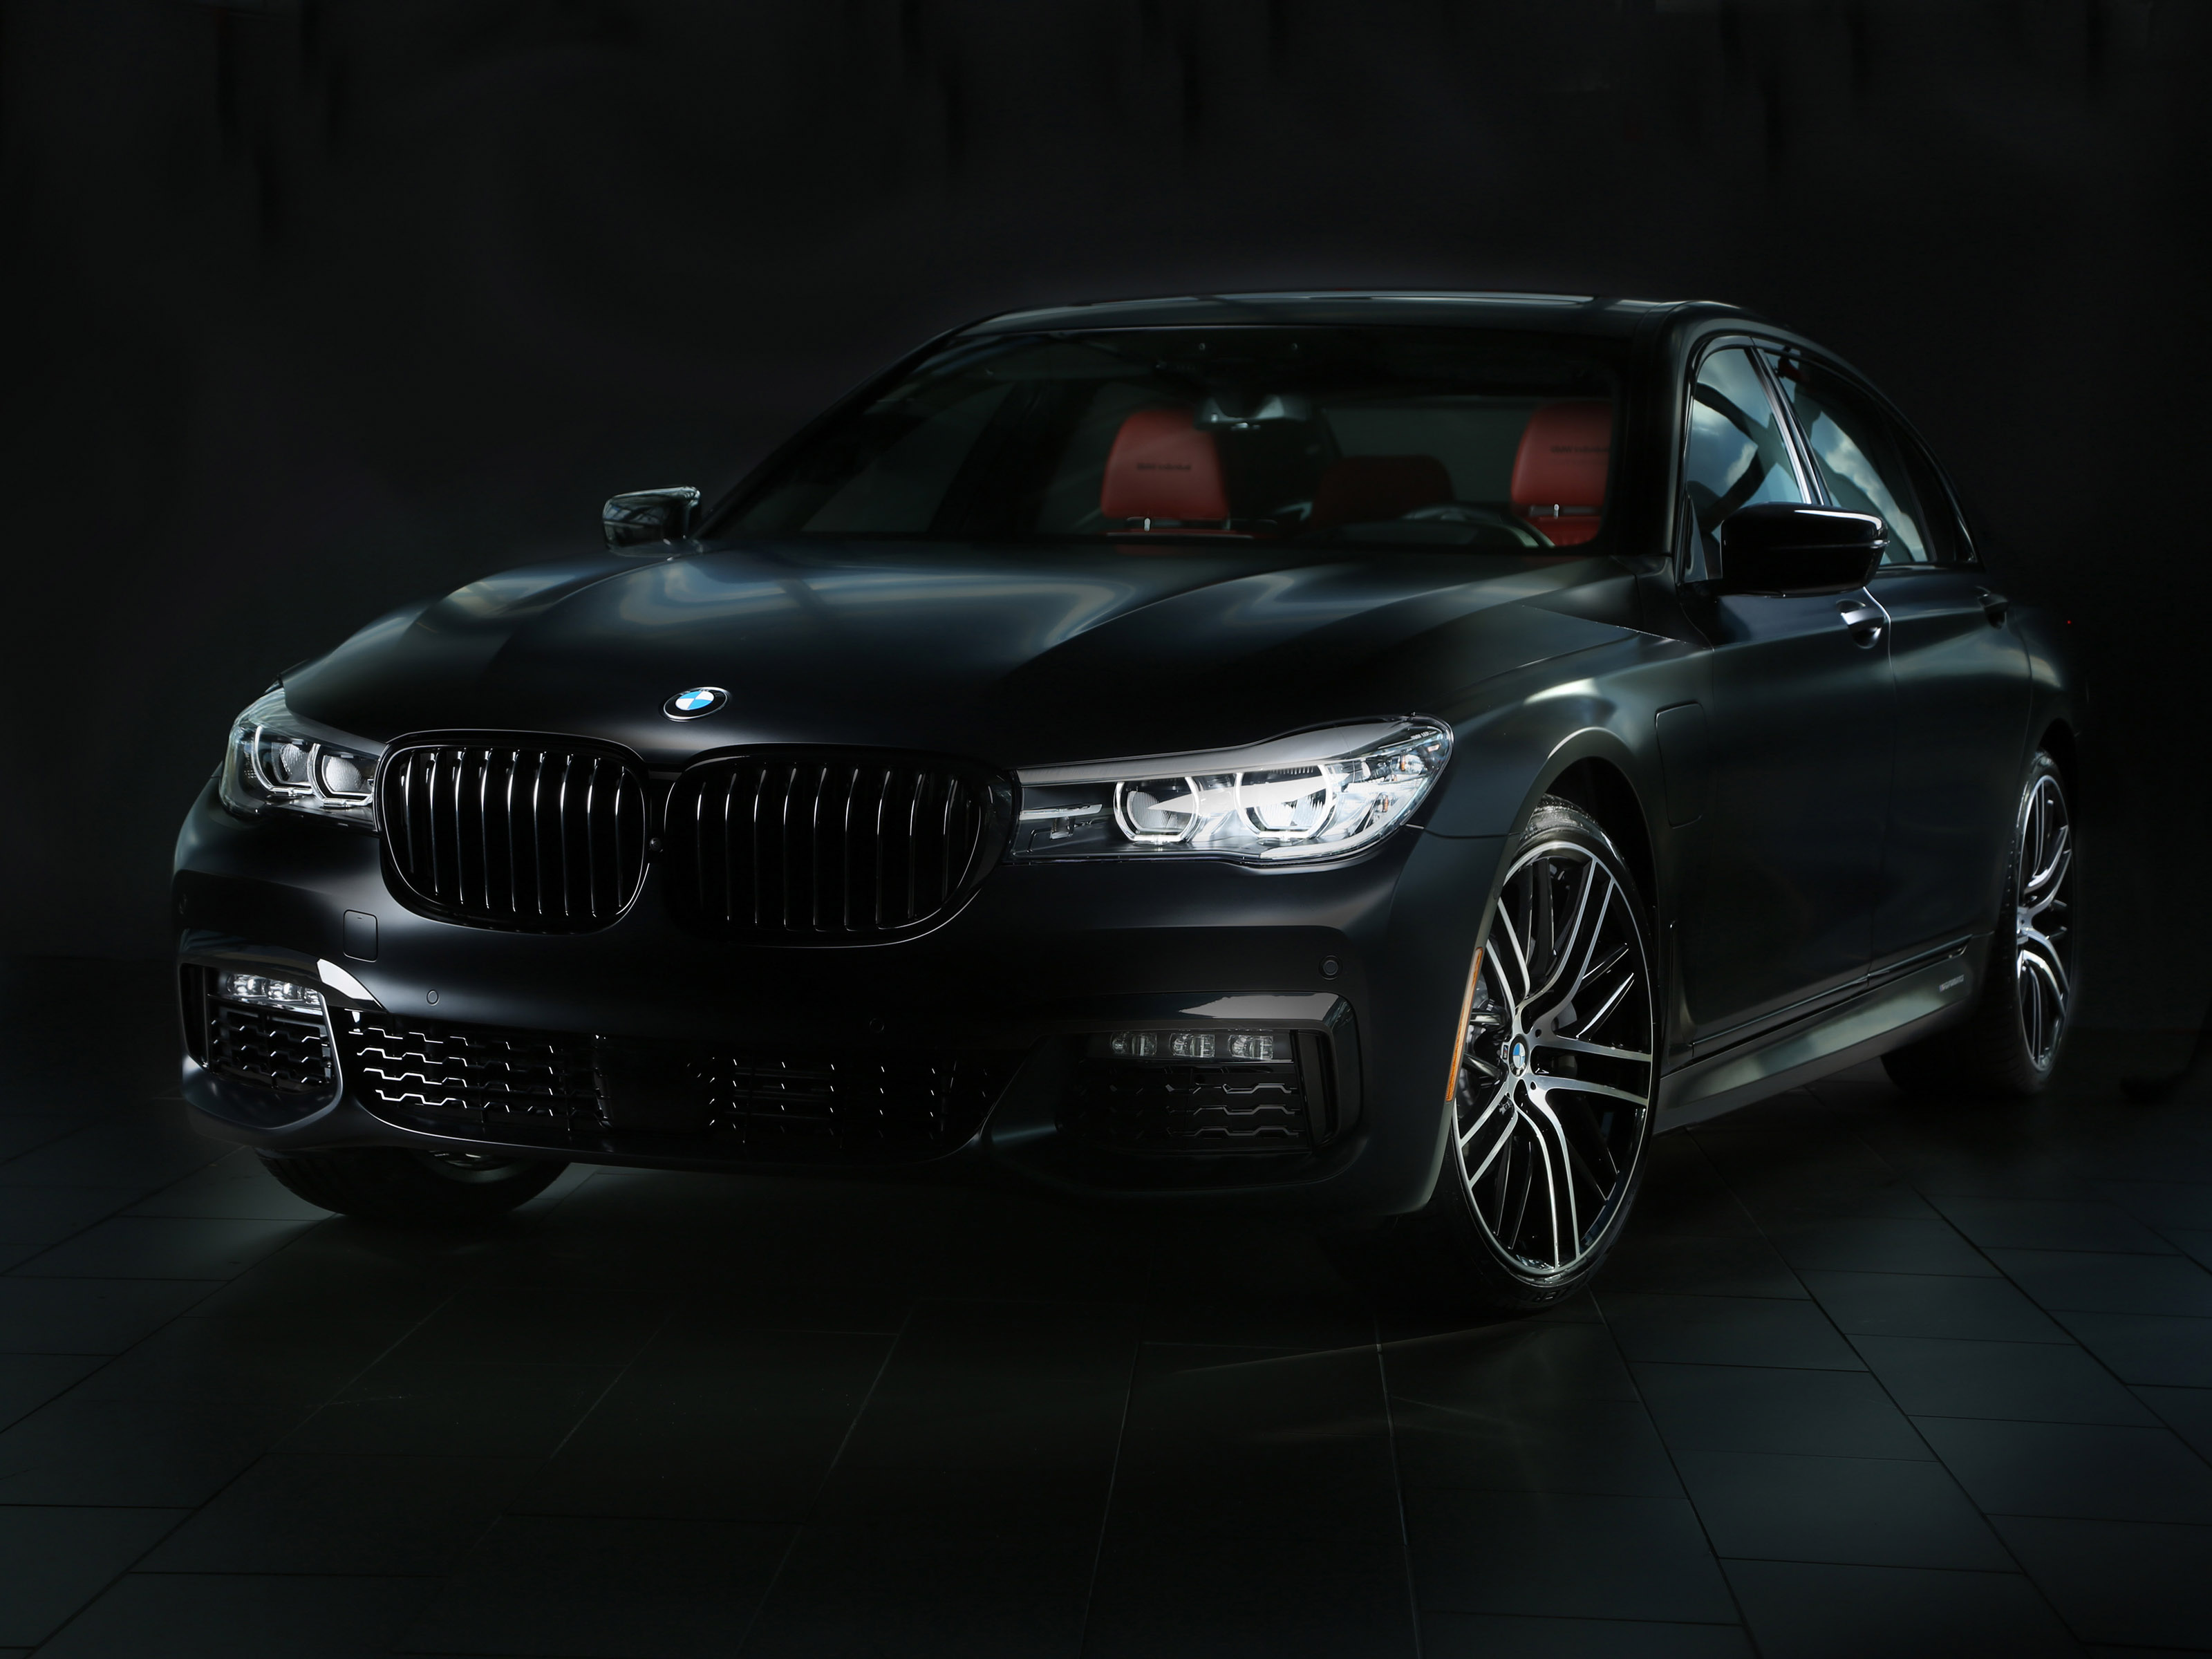 BMW 7 Series iPerformance (G11) exterior restyling